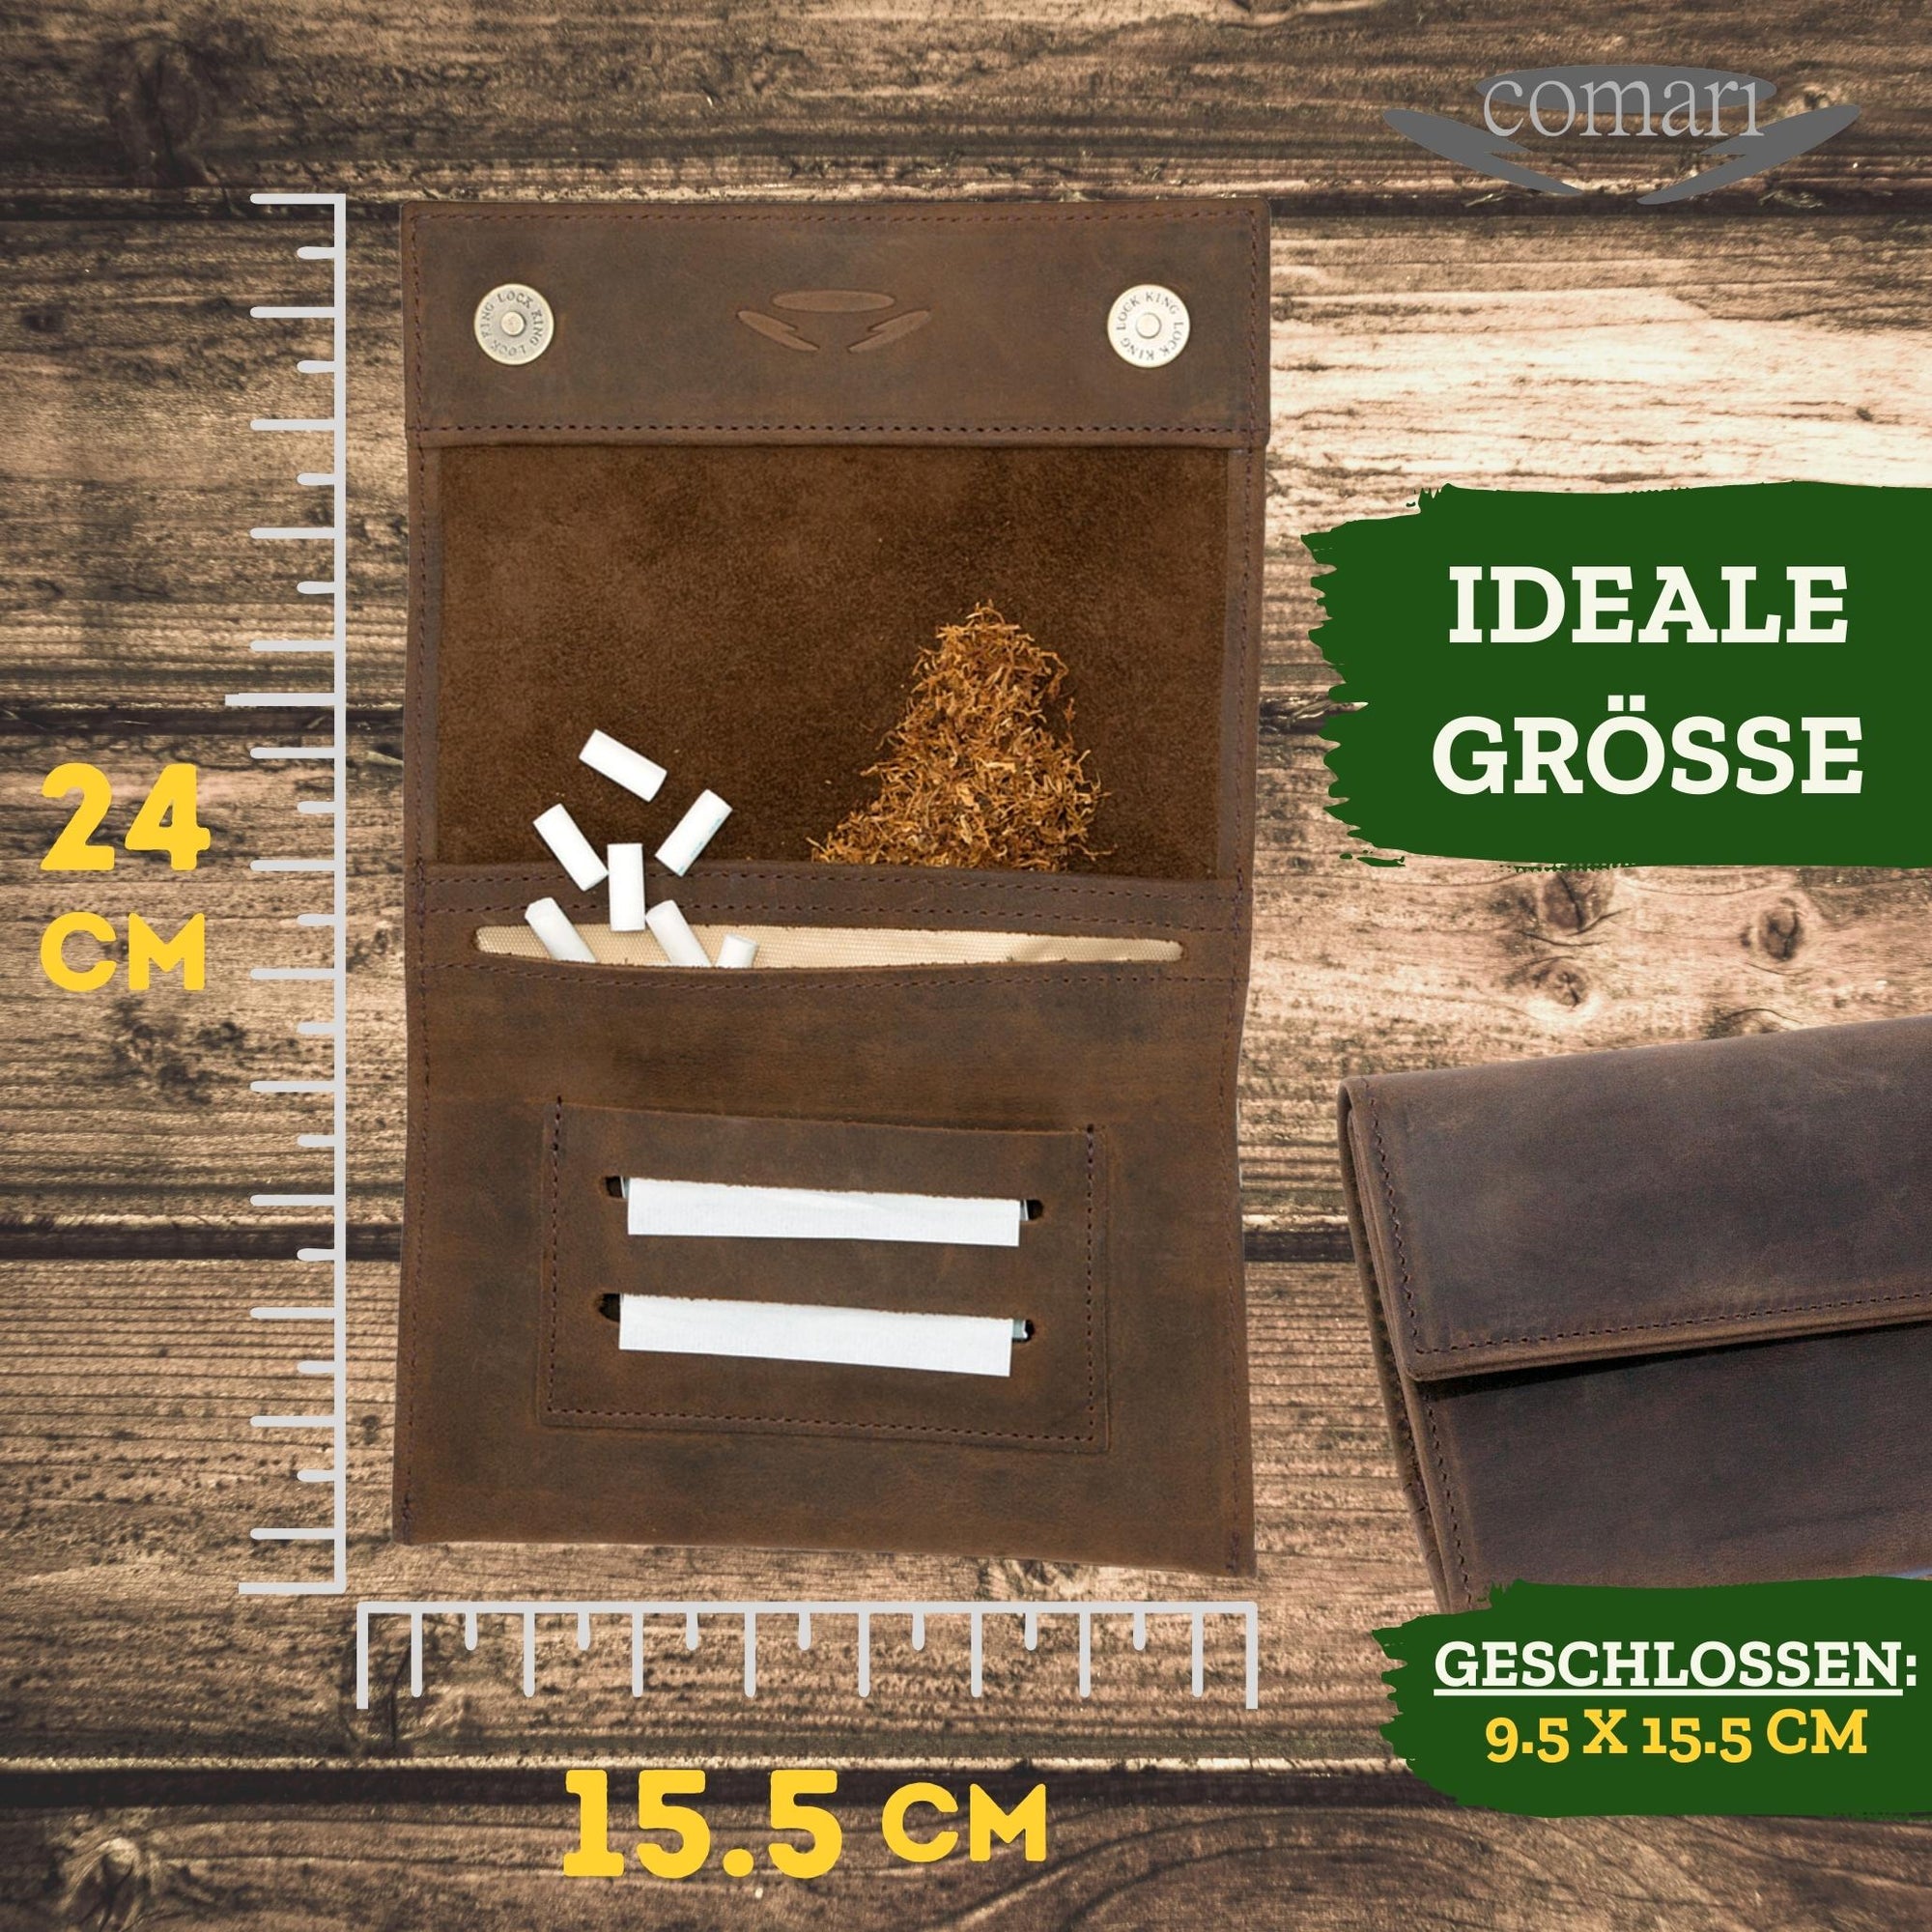 HAND ROLLING TOBACCO POUCH COGNAC